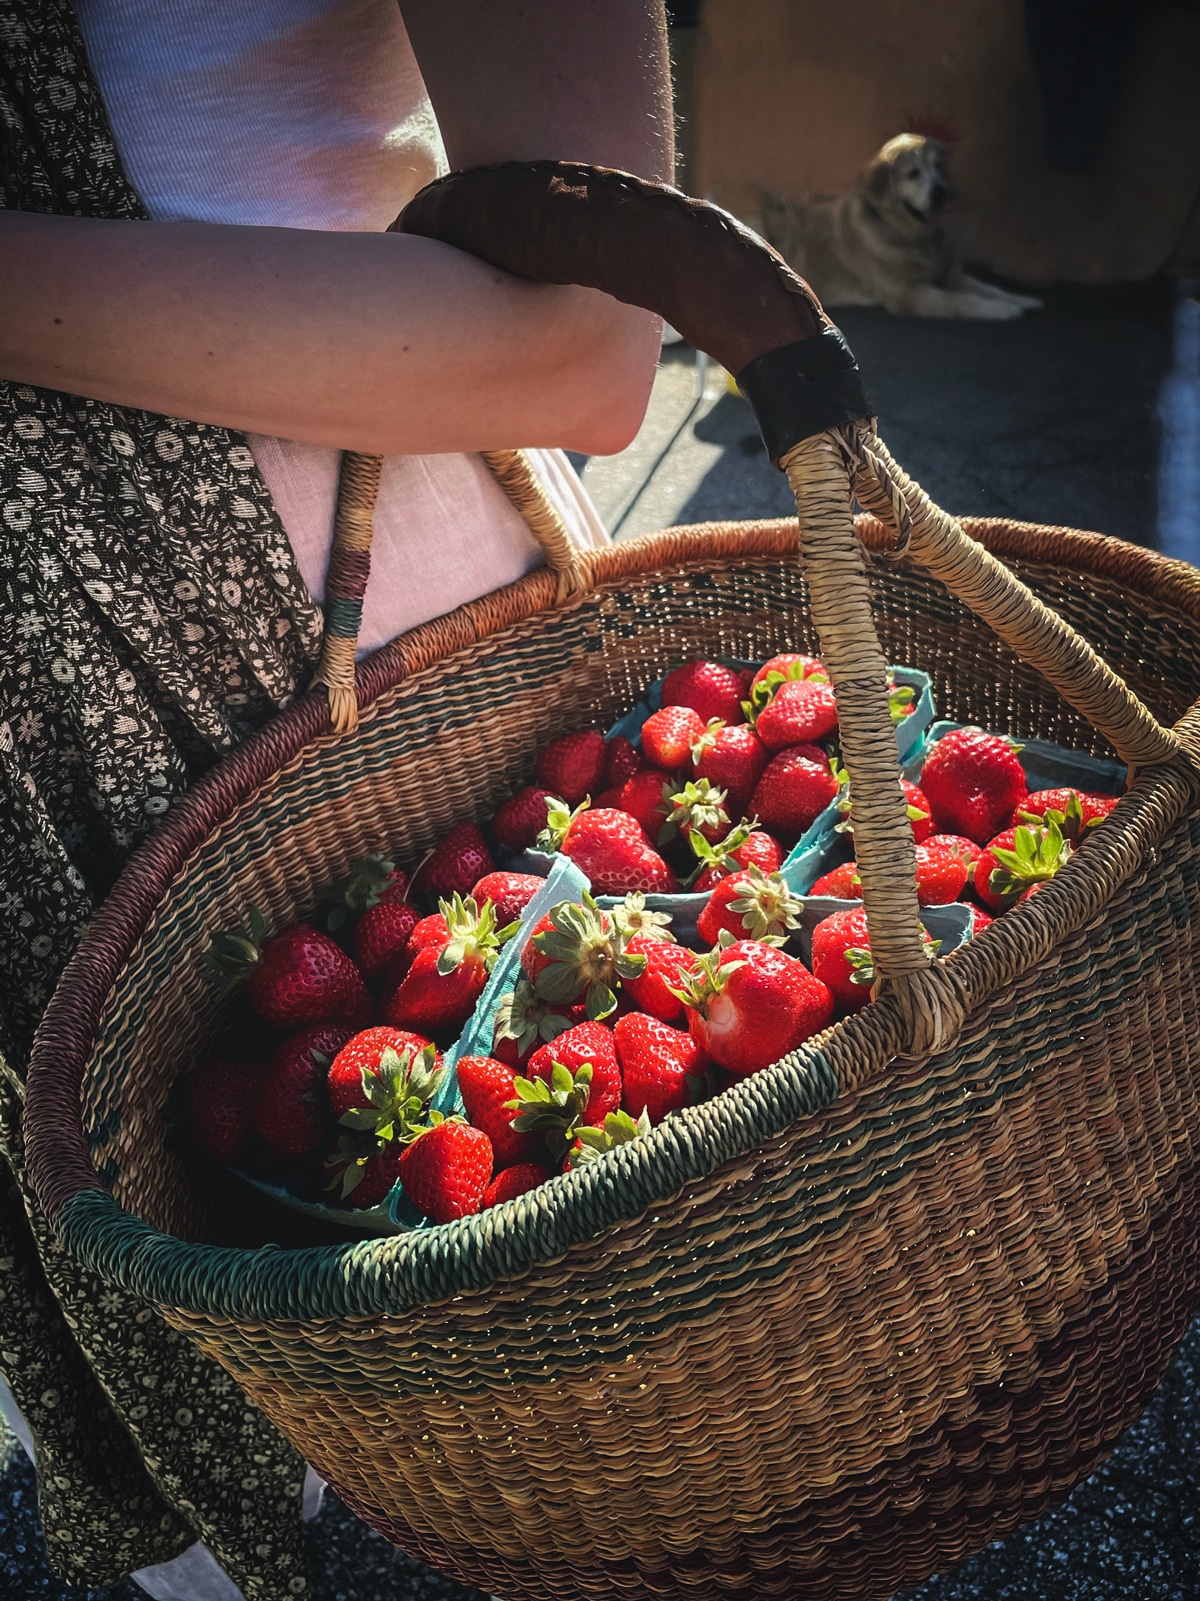 Buying strawberries at the market in a basket - tips from chefs that will make your food taste better